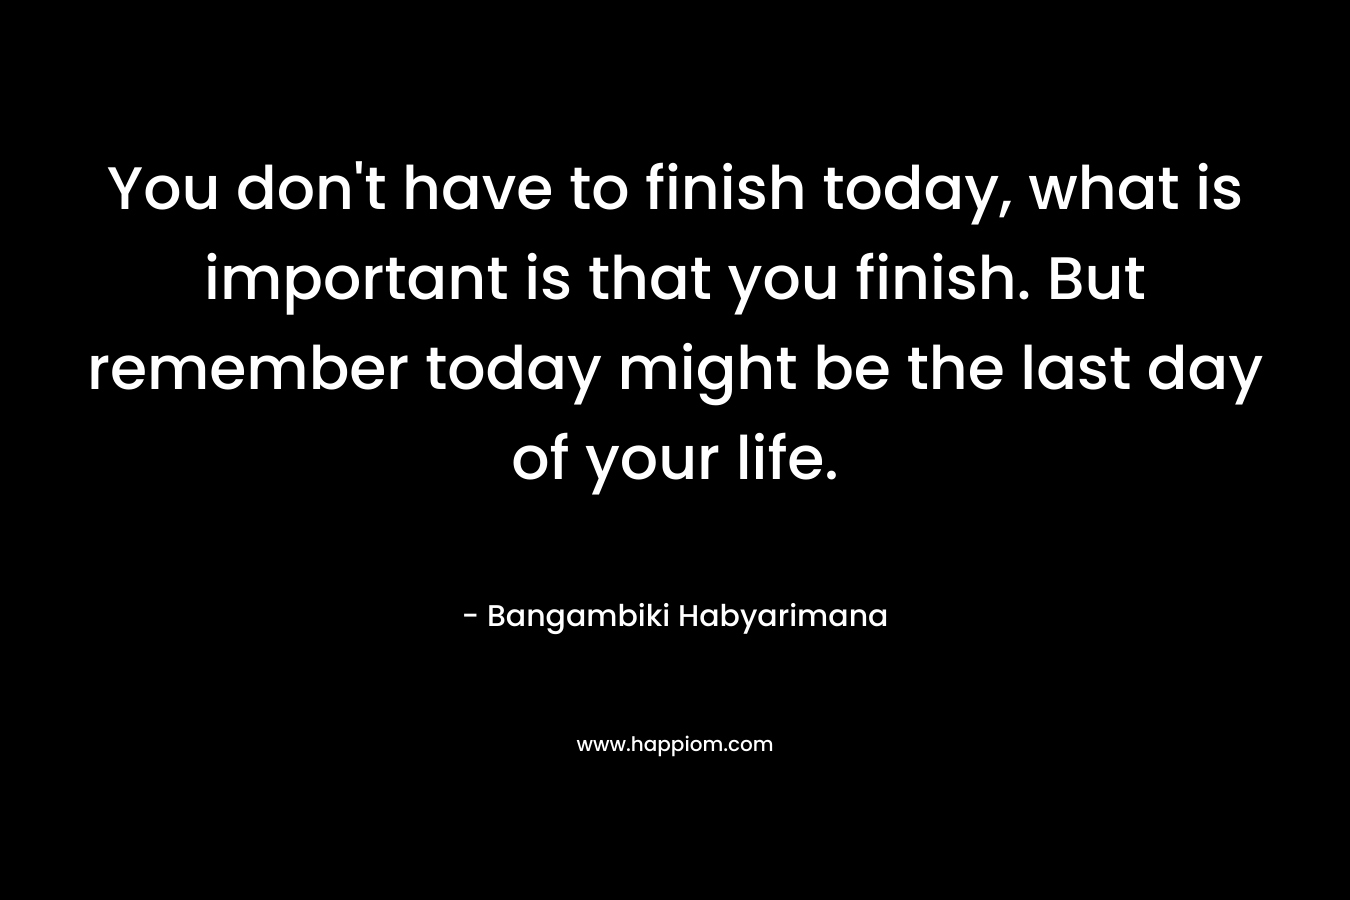 You don't have to finish today, what is important is that you finish. But remember today might be the last day of your life.